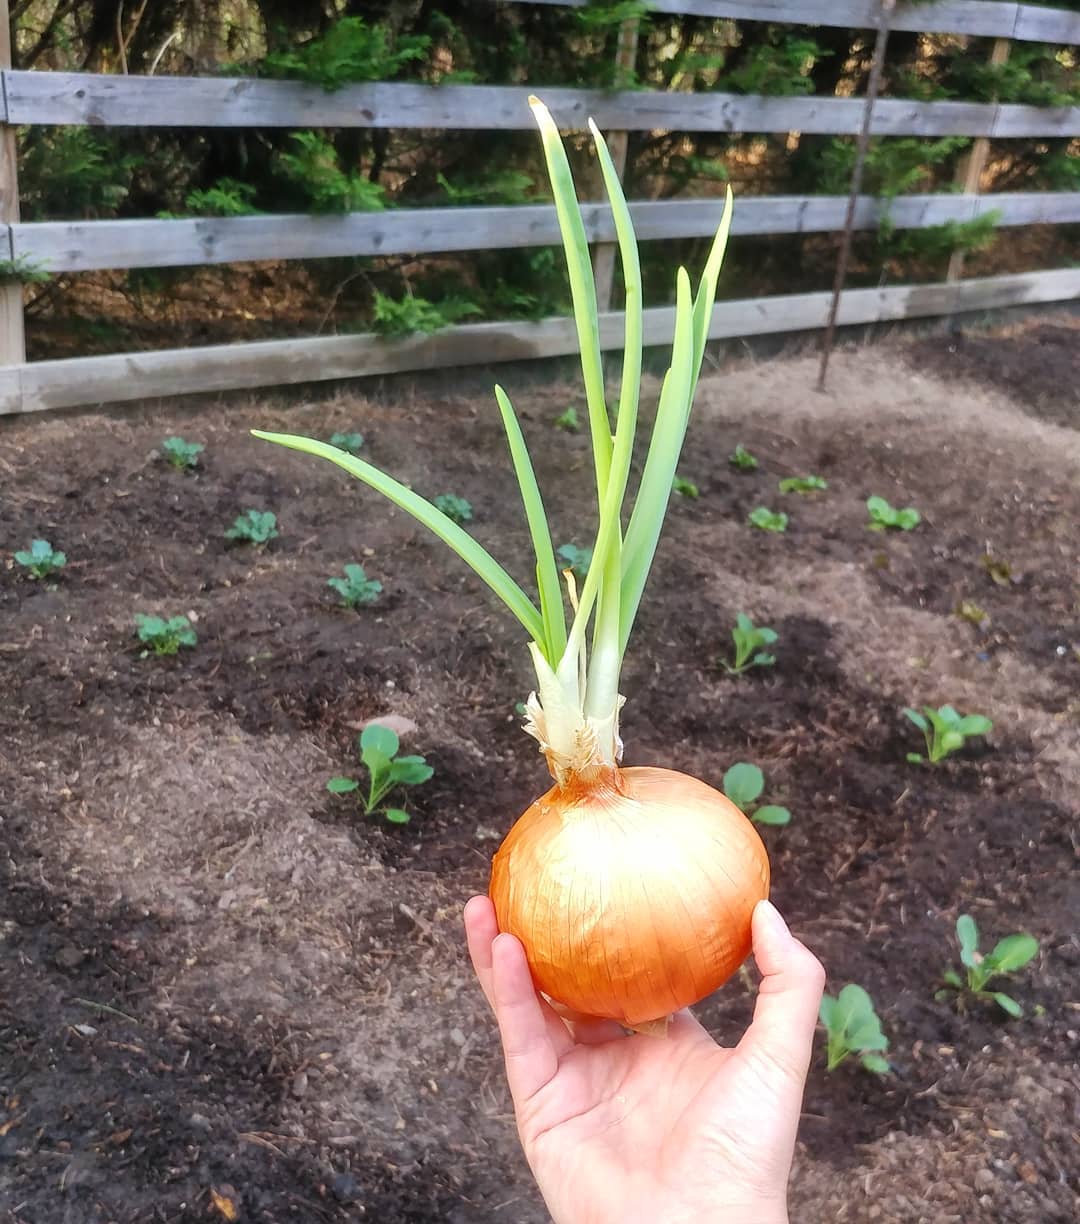 I don't want to brag BUT I grew this onion in my kitchen, totally organically and free of substrate. It looks fantastic and I am going to plant it in the garden with the other onions right now! 
But Jesse, you say, didn't you really just leave a store bought onion in a bowl on the counter for two months and finally decide you had to do something about it and are planting it outside because you feel guilty about food waste? 
Both are possible ways to look at this situation. You say tomato, I say tah-mah-to,  either way it's a pretty onion.